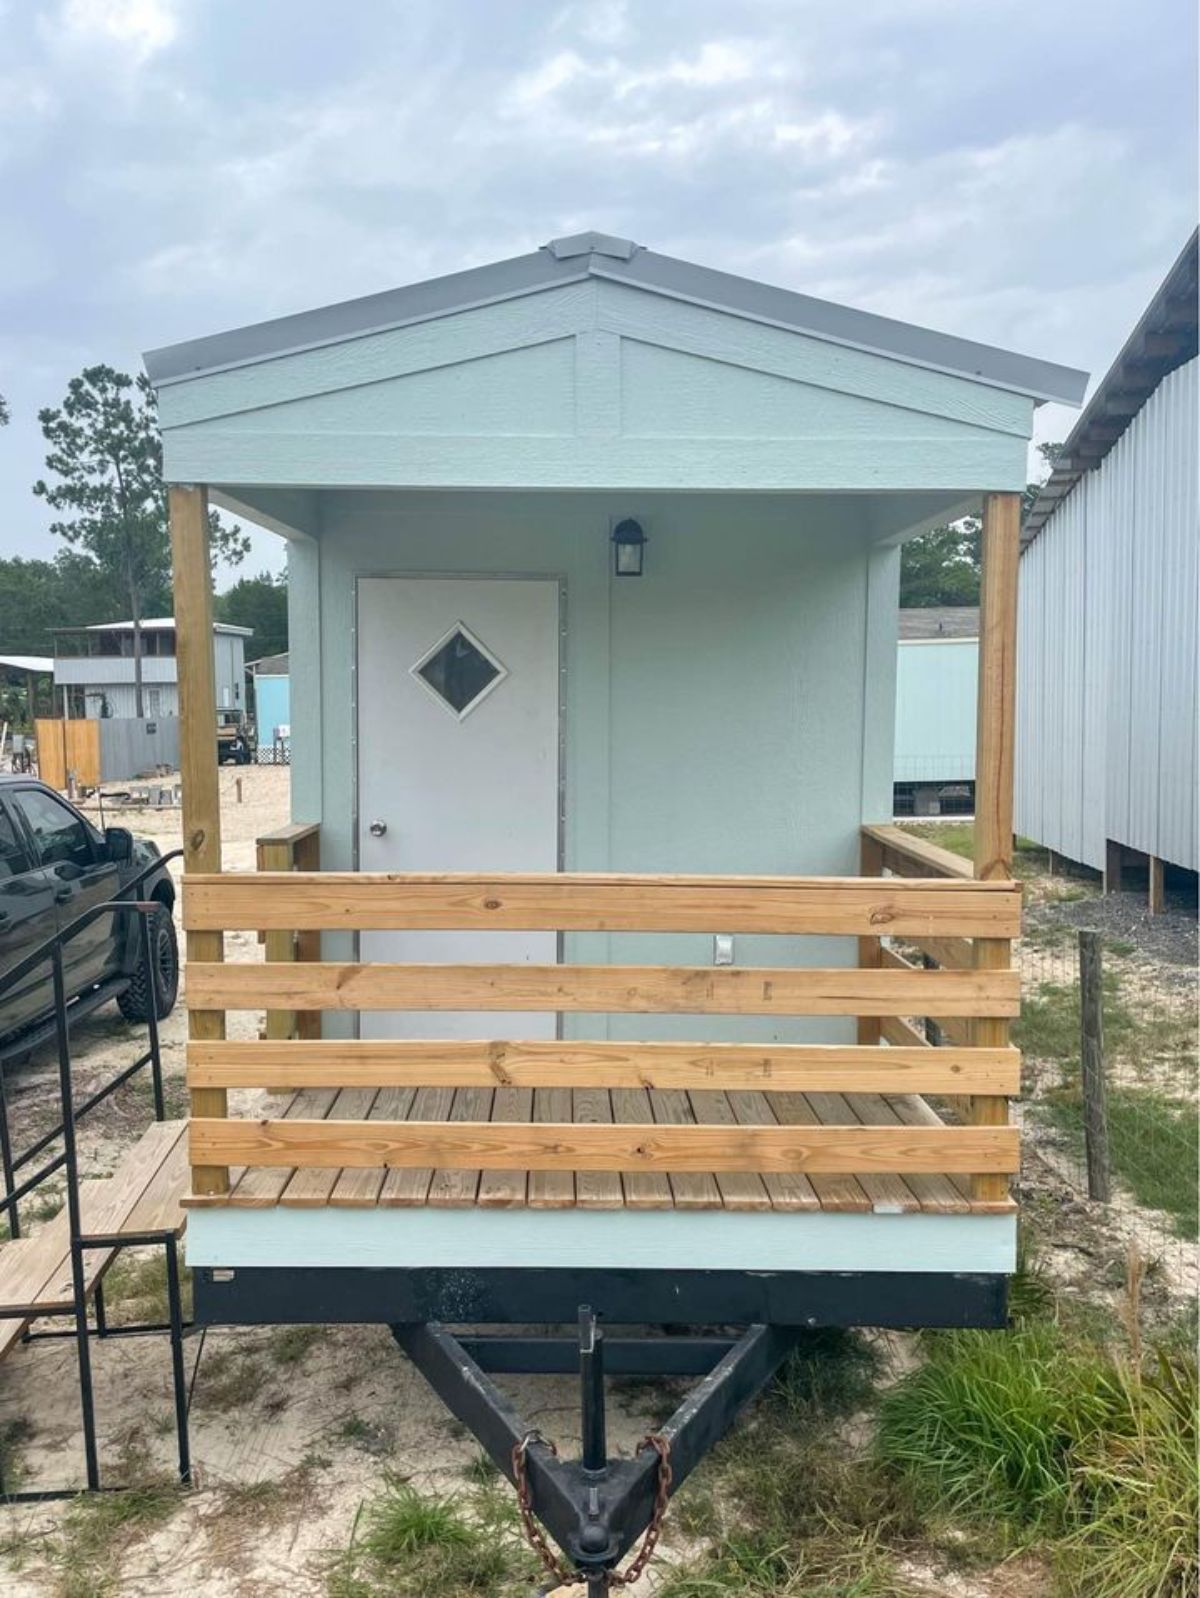 It has a tiny little porch on the exterior of Brand New 35’ Tiny House